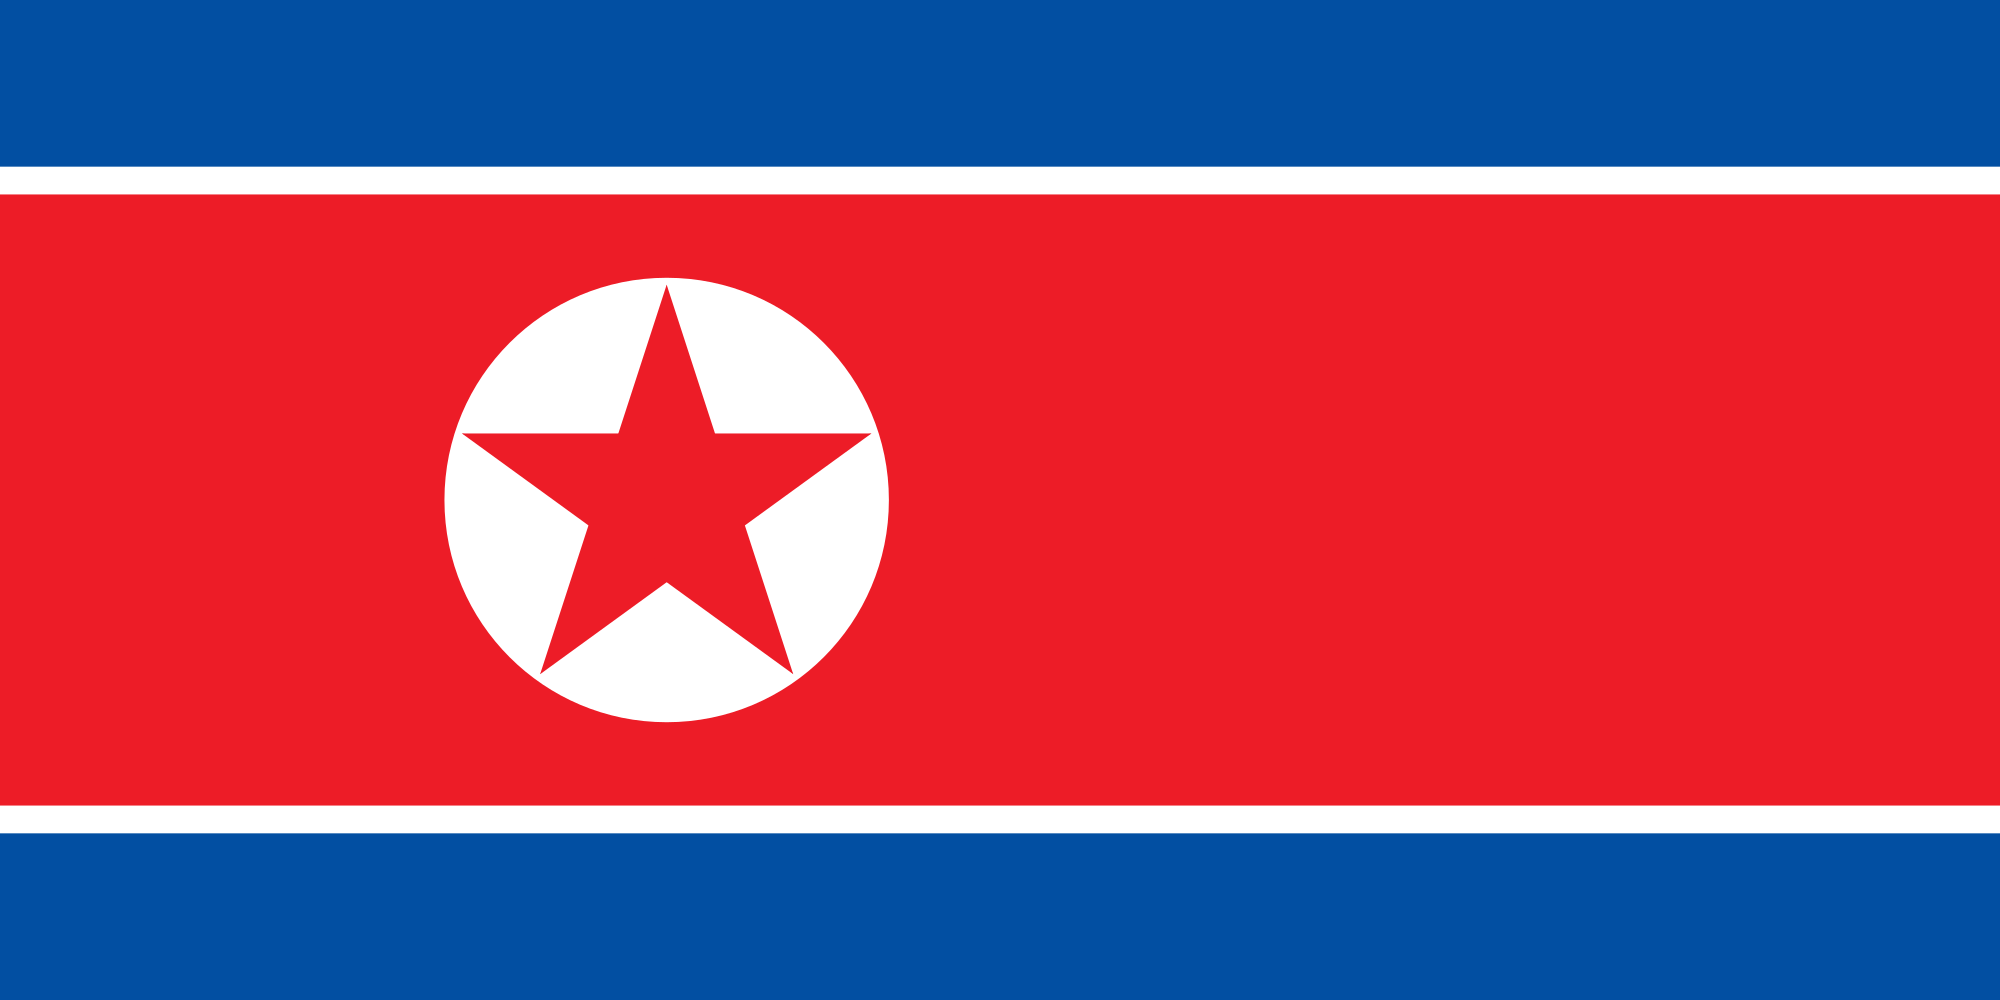 Thumbnail for File:The Flag of the DPRK.png